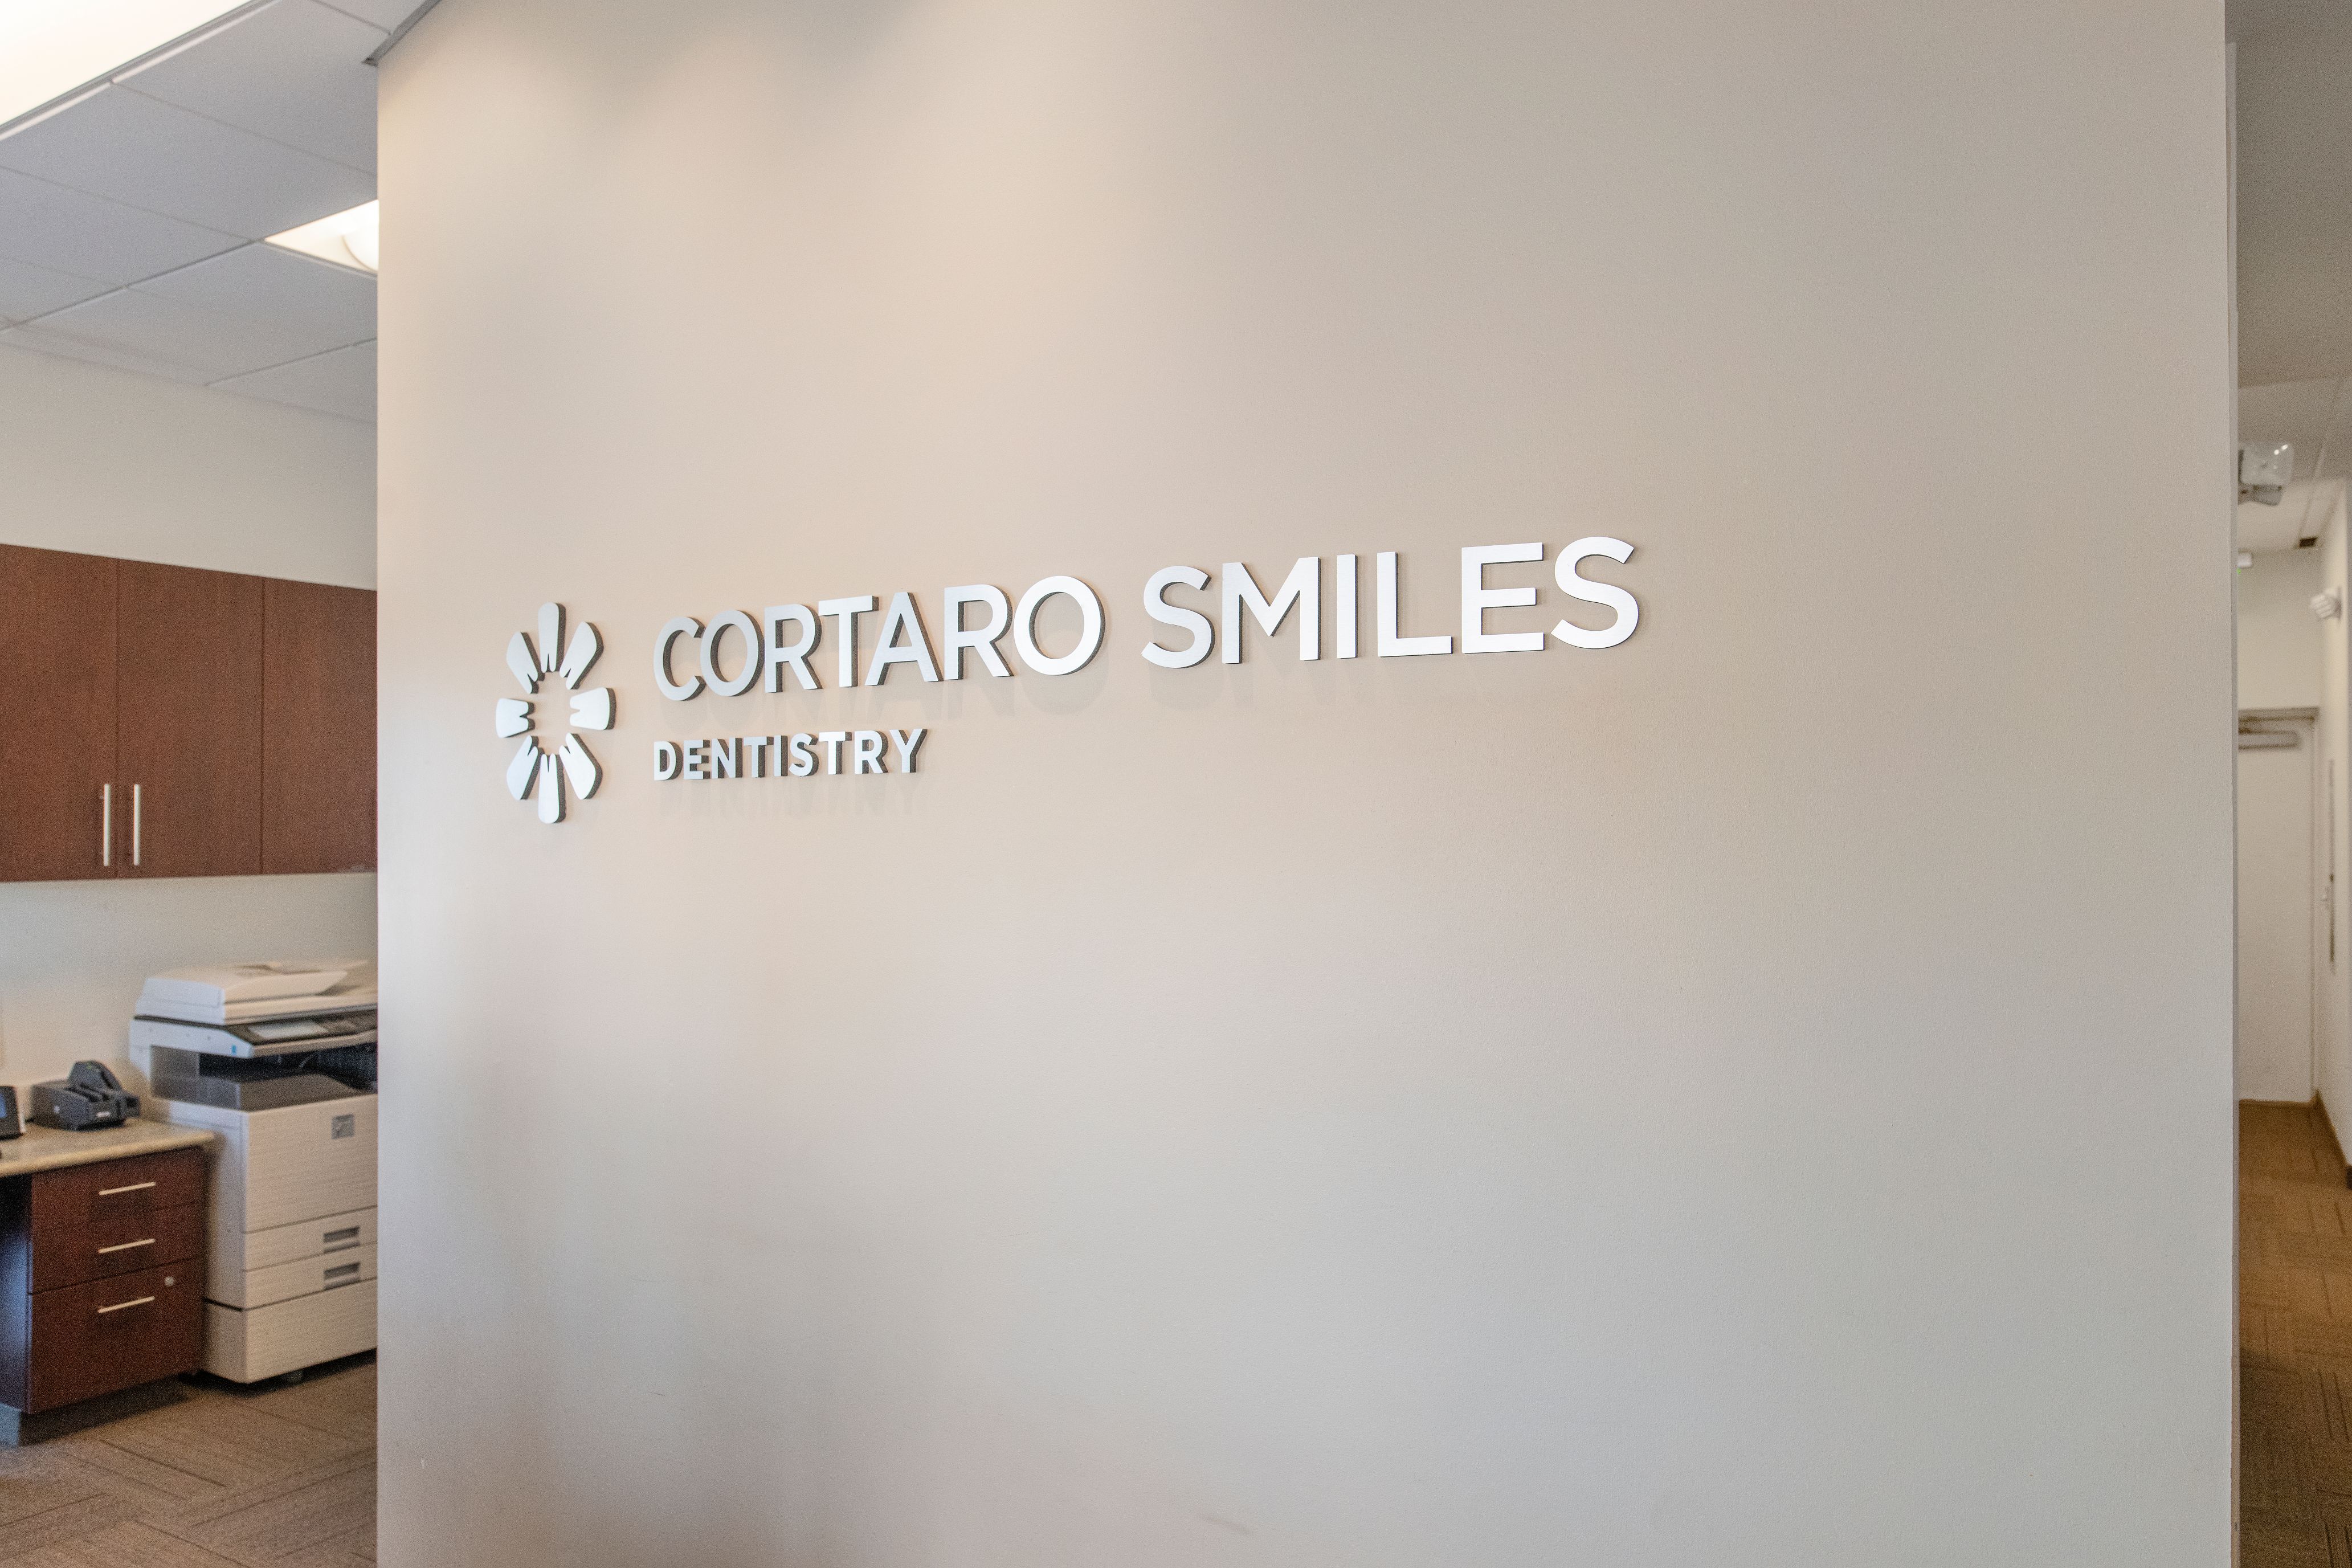 Cortaro Smiles Dentistry and Orthodontics opened its doors to the Tucson community in October 2010!